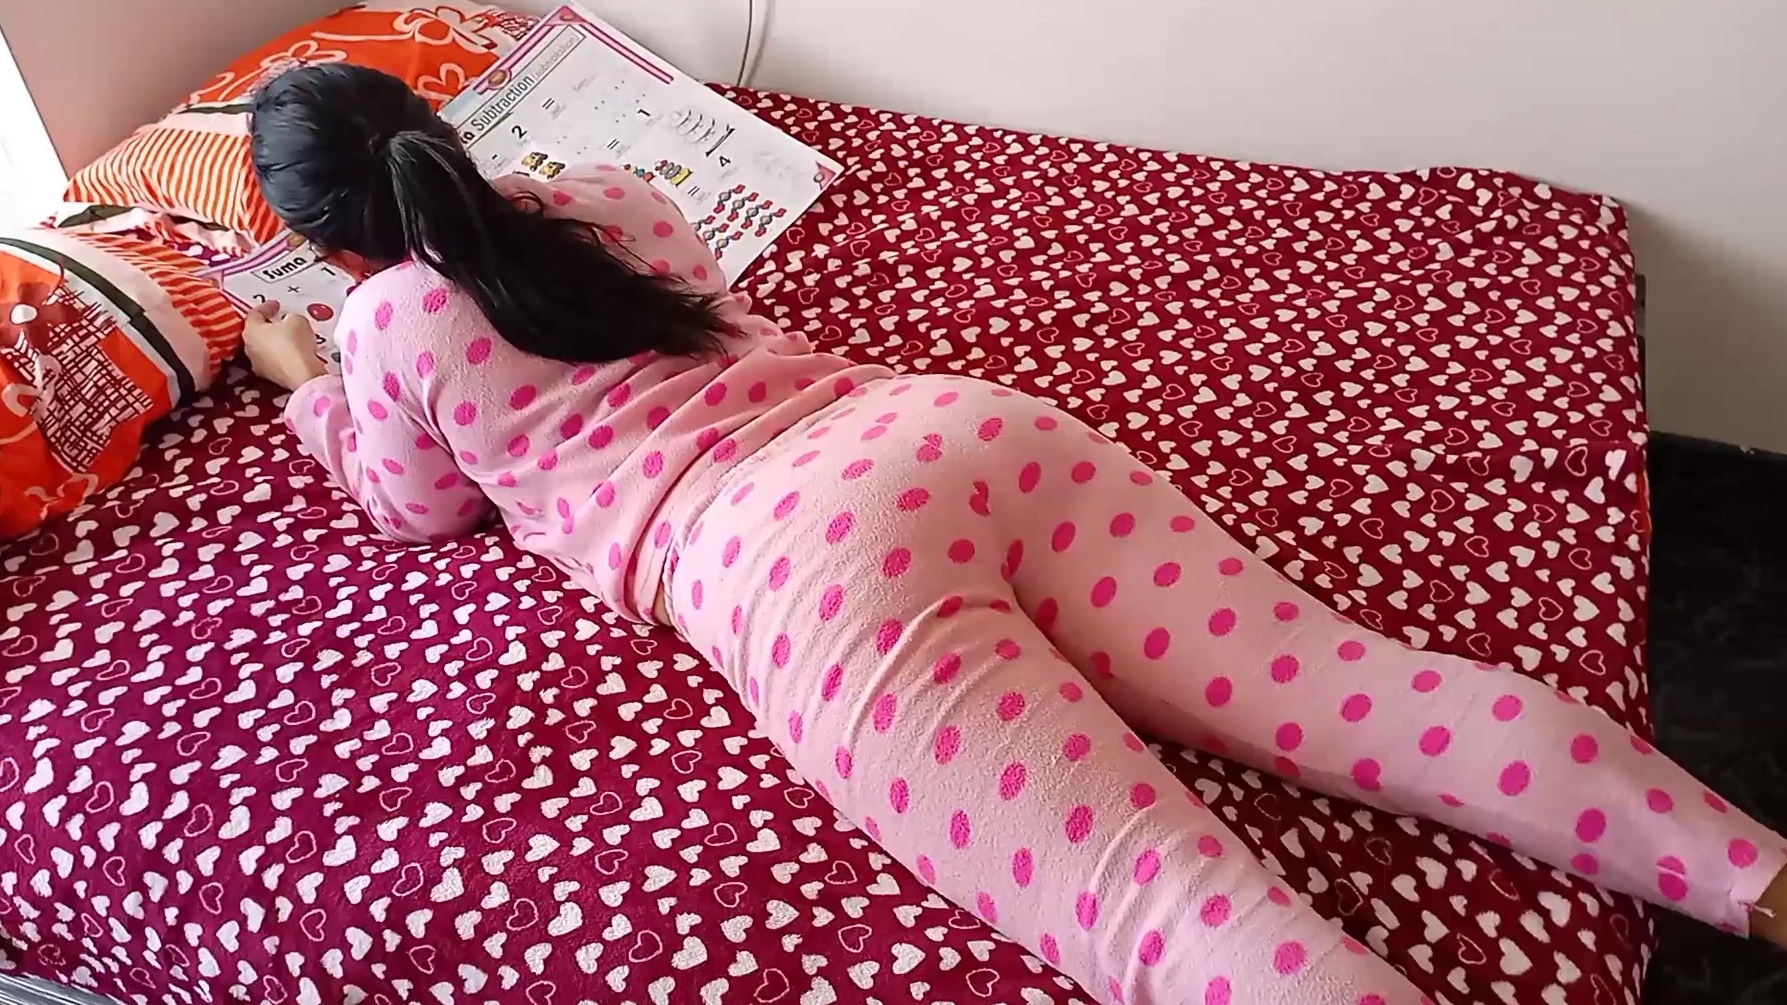 Pounding In Pjs - Stepdaughter's big ass in pajama is irresistible.